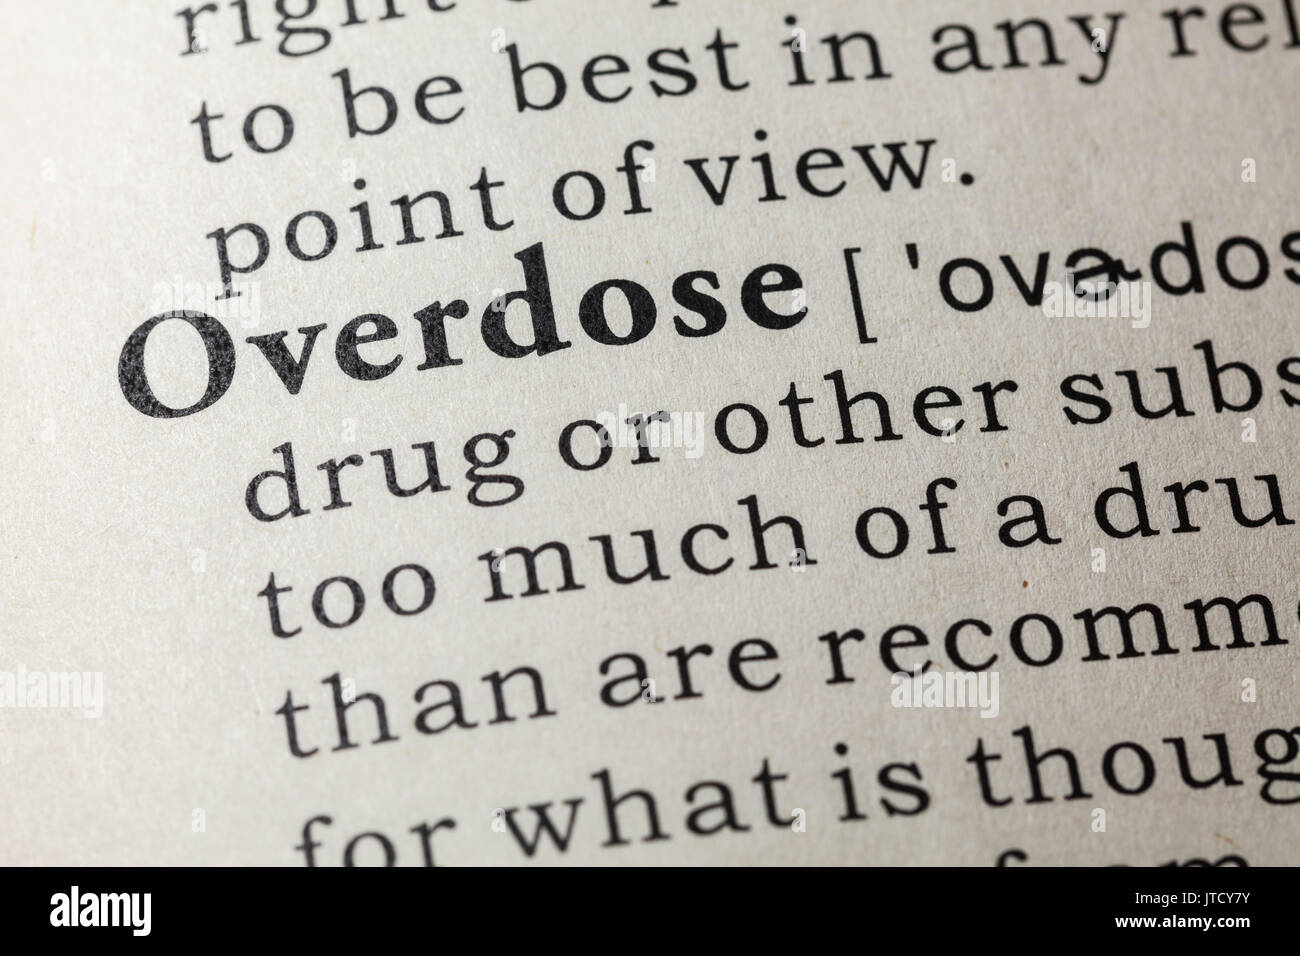 Fake Dictionary, Dictionary definition of the word overdose. including key descriptive words. Stock Photo